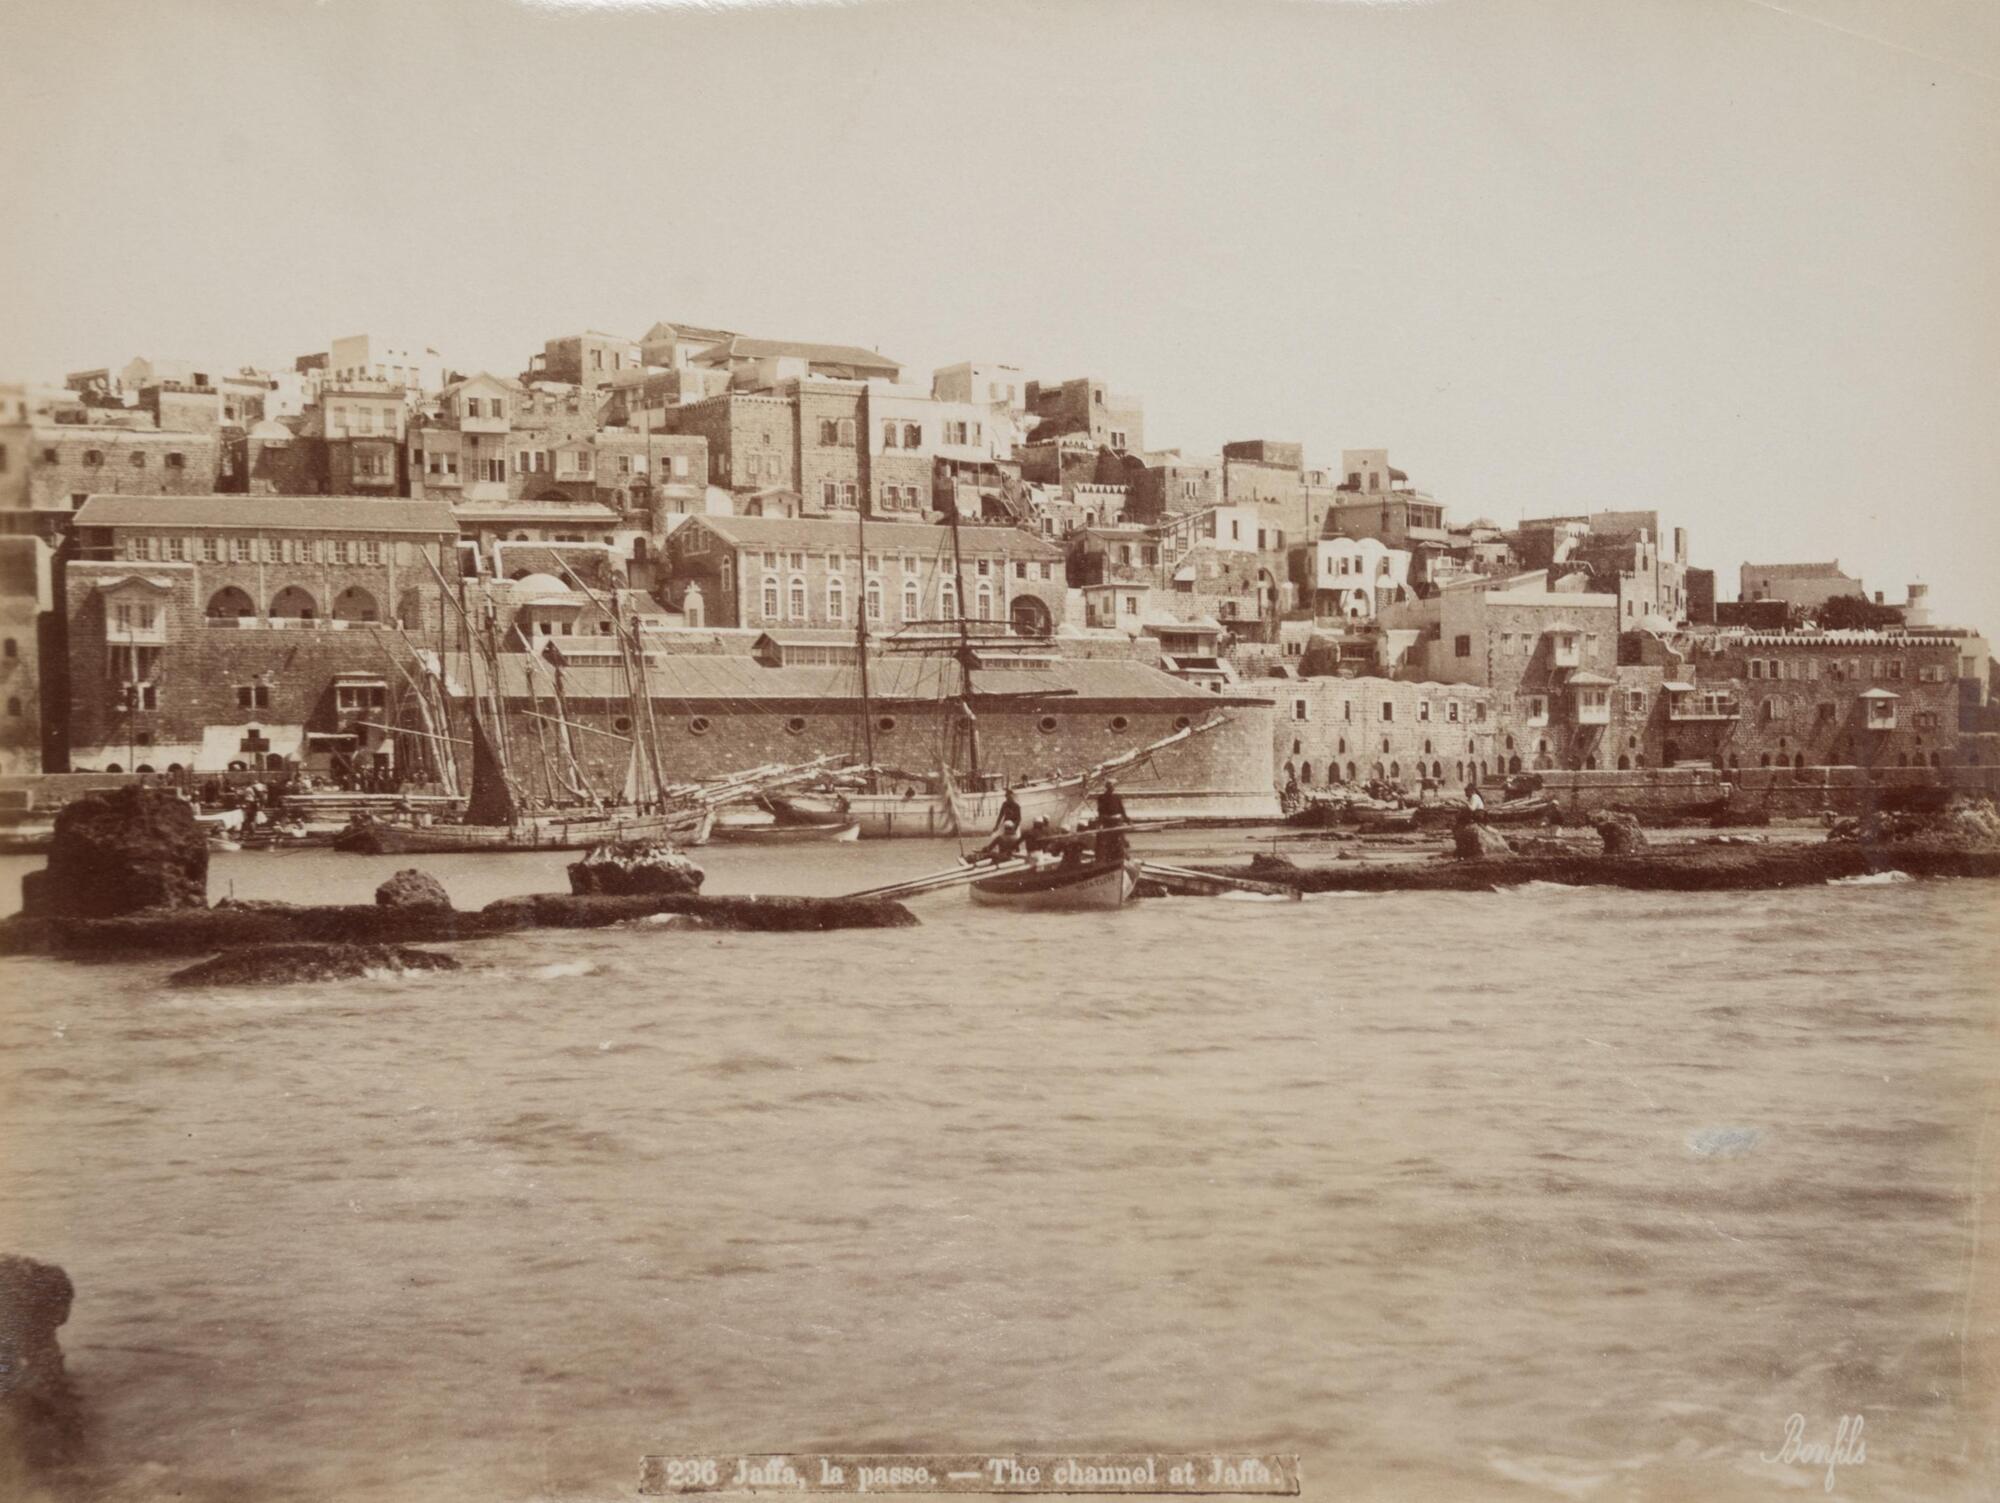 View of a wharf from across a channel. Ships and small boats populate the middle ground, while a city rises behind. The foreground is mainly seawater.